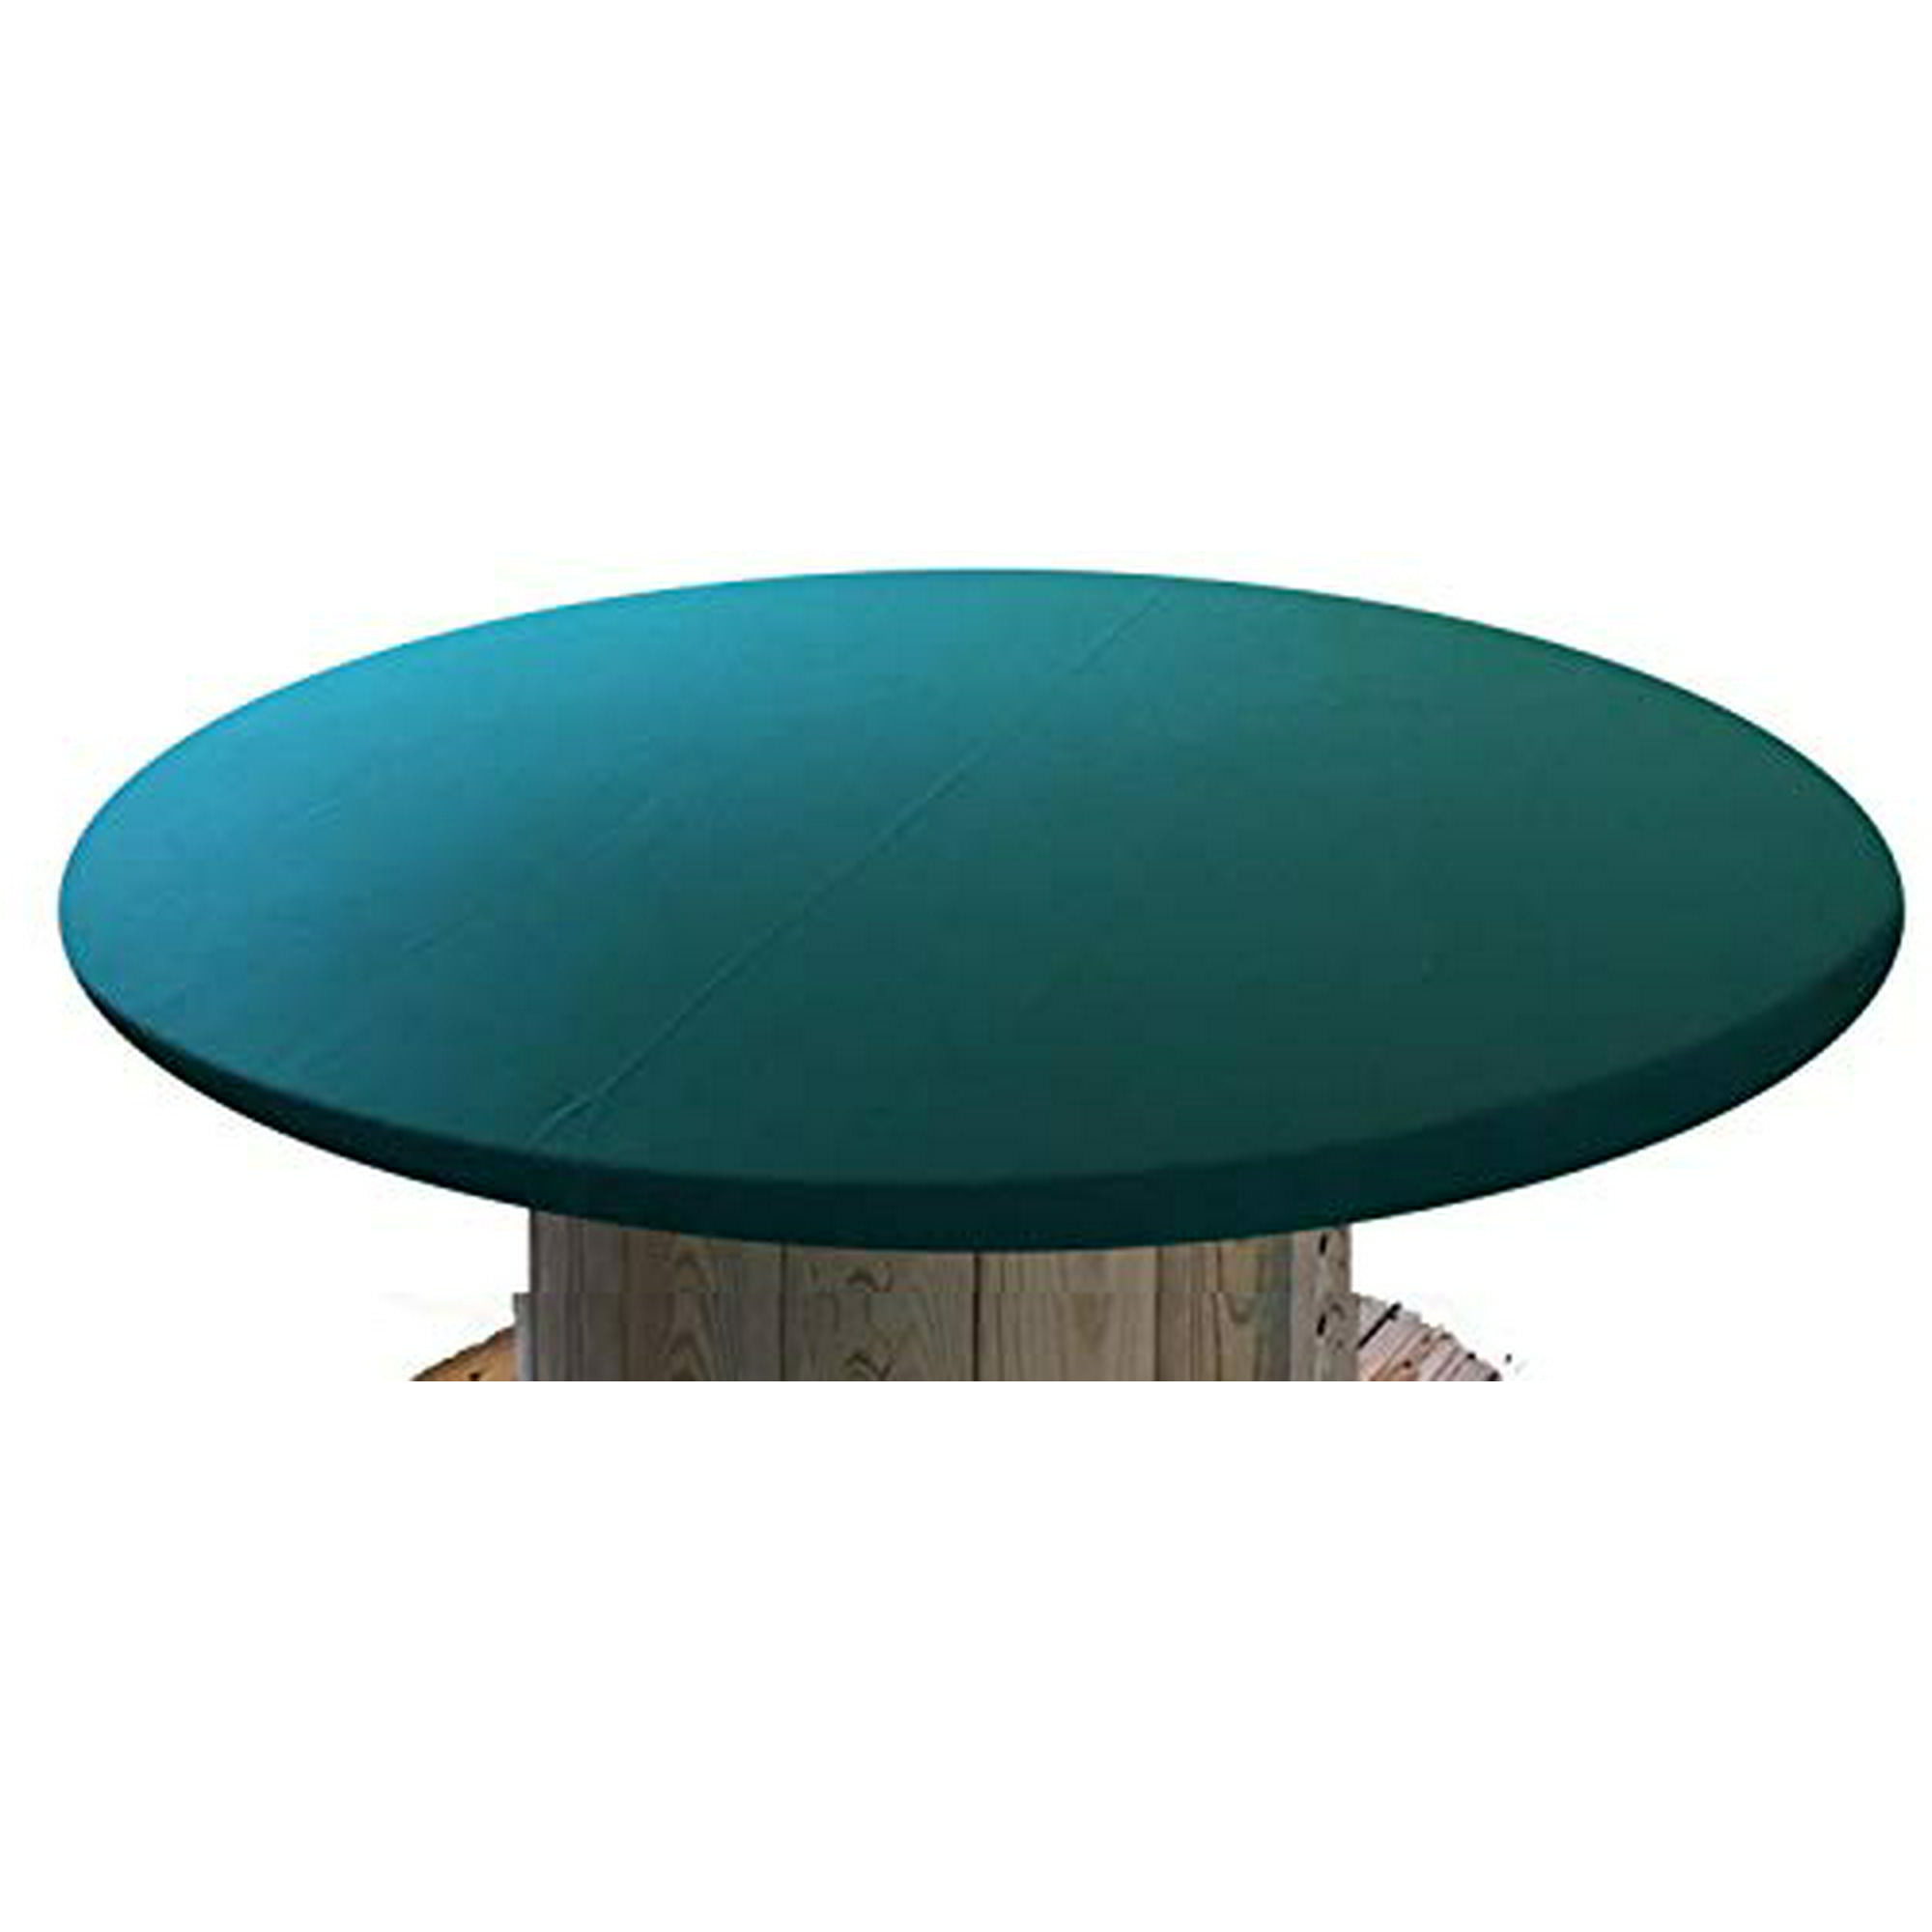 Felt Table Cover Patio, Patio Table Cover Round 48 Inch